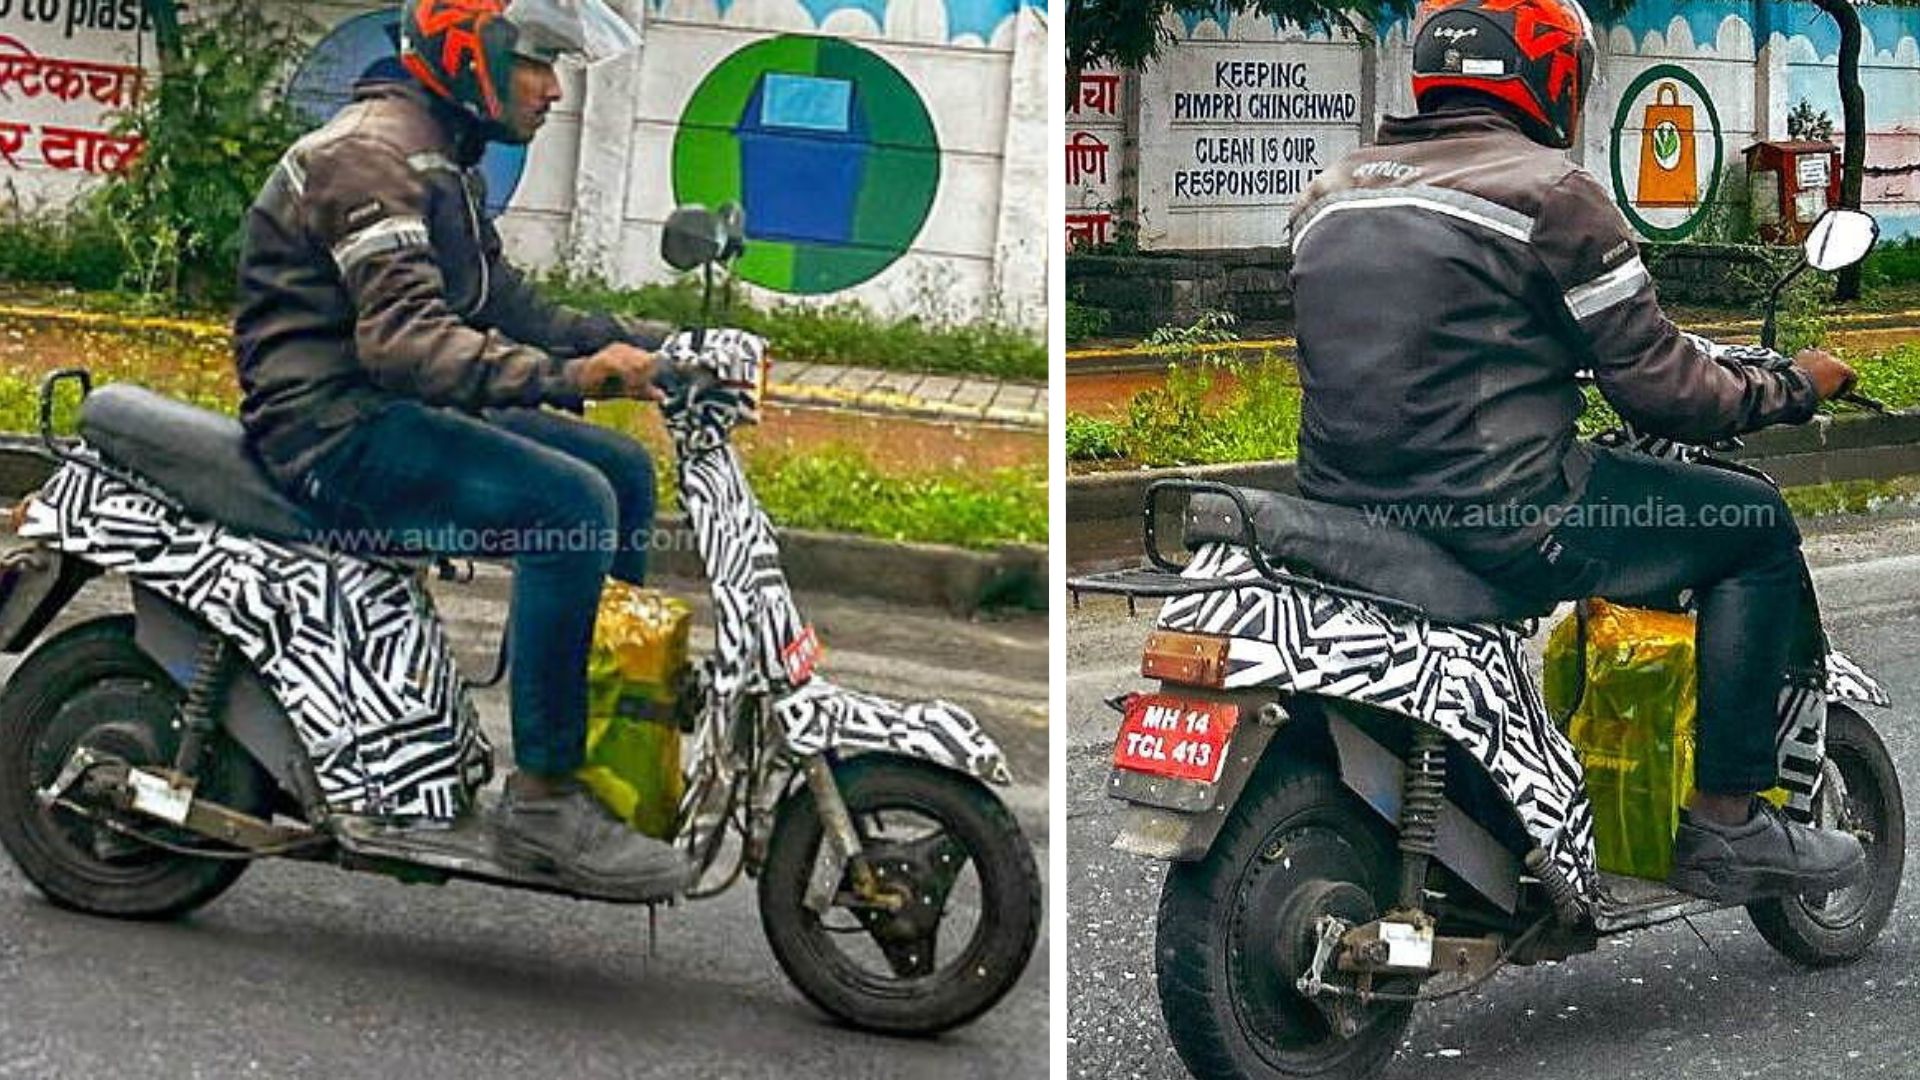 Bajaj likely to launch a new electric scooter which was recently spotted in the road